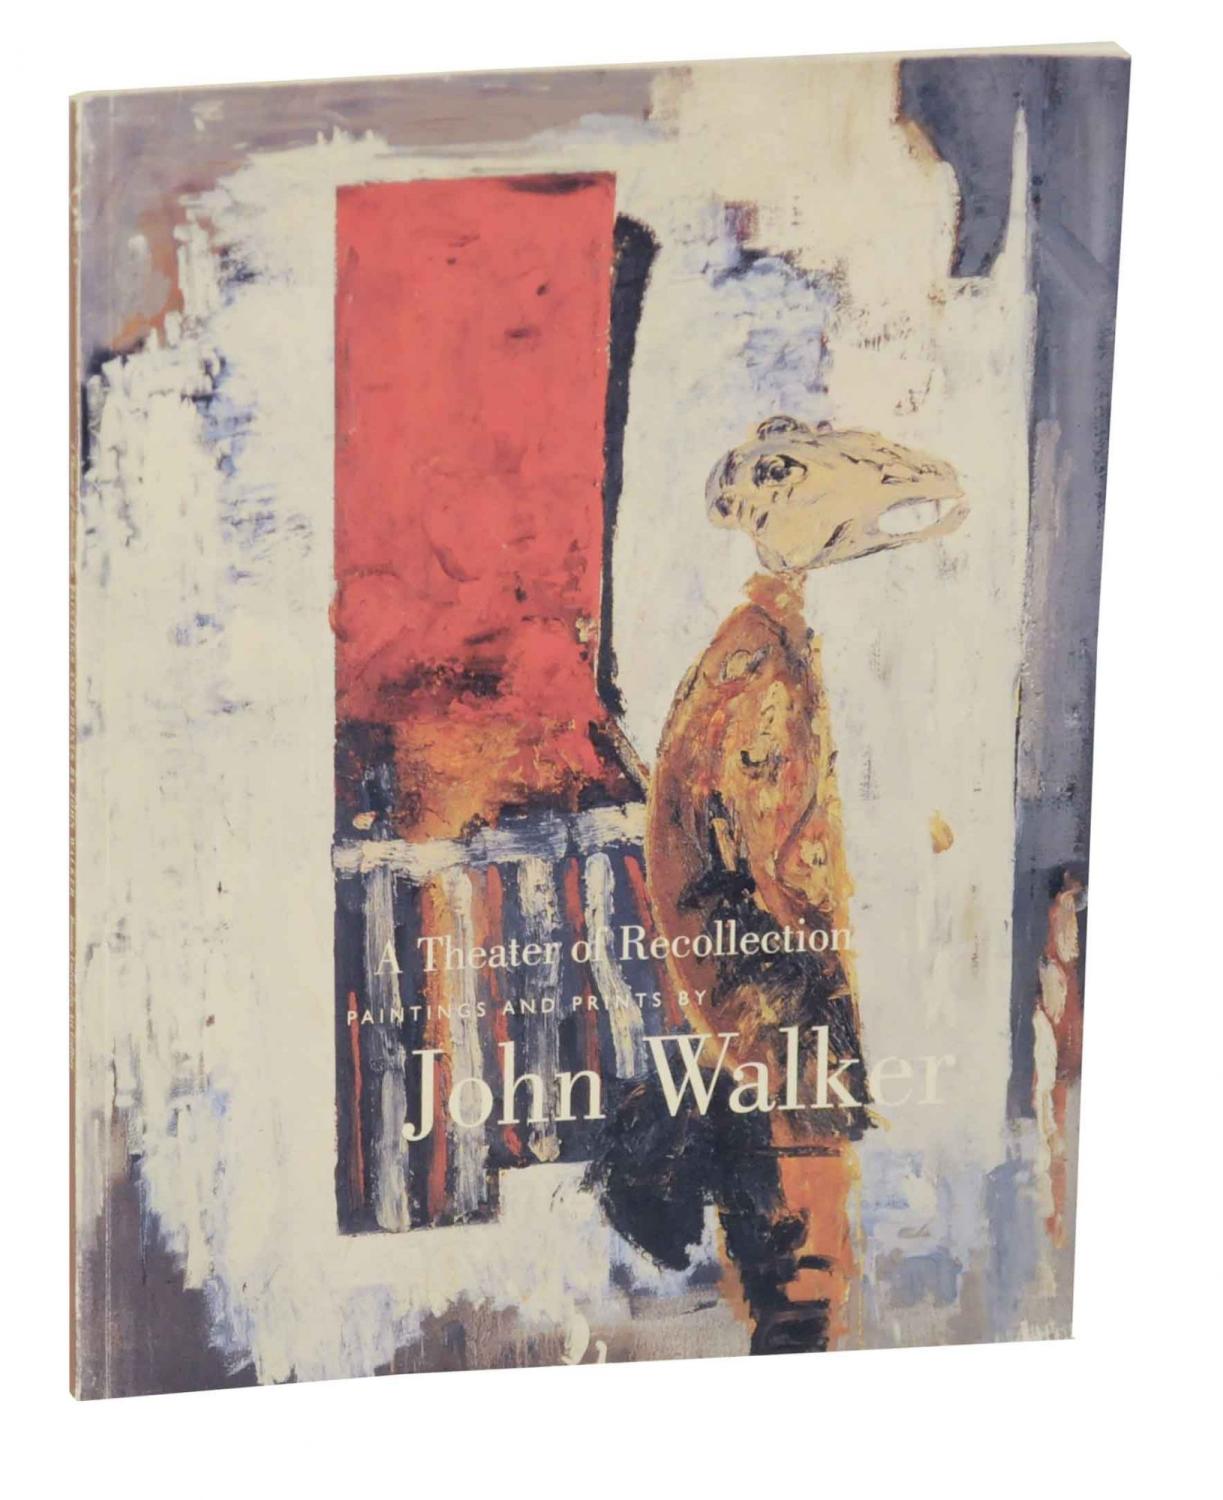 A Theater of Recollection: Paintings and Prints by John Walker - STOMBERG, John R. and Rosanna Warren - John Walker